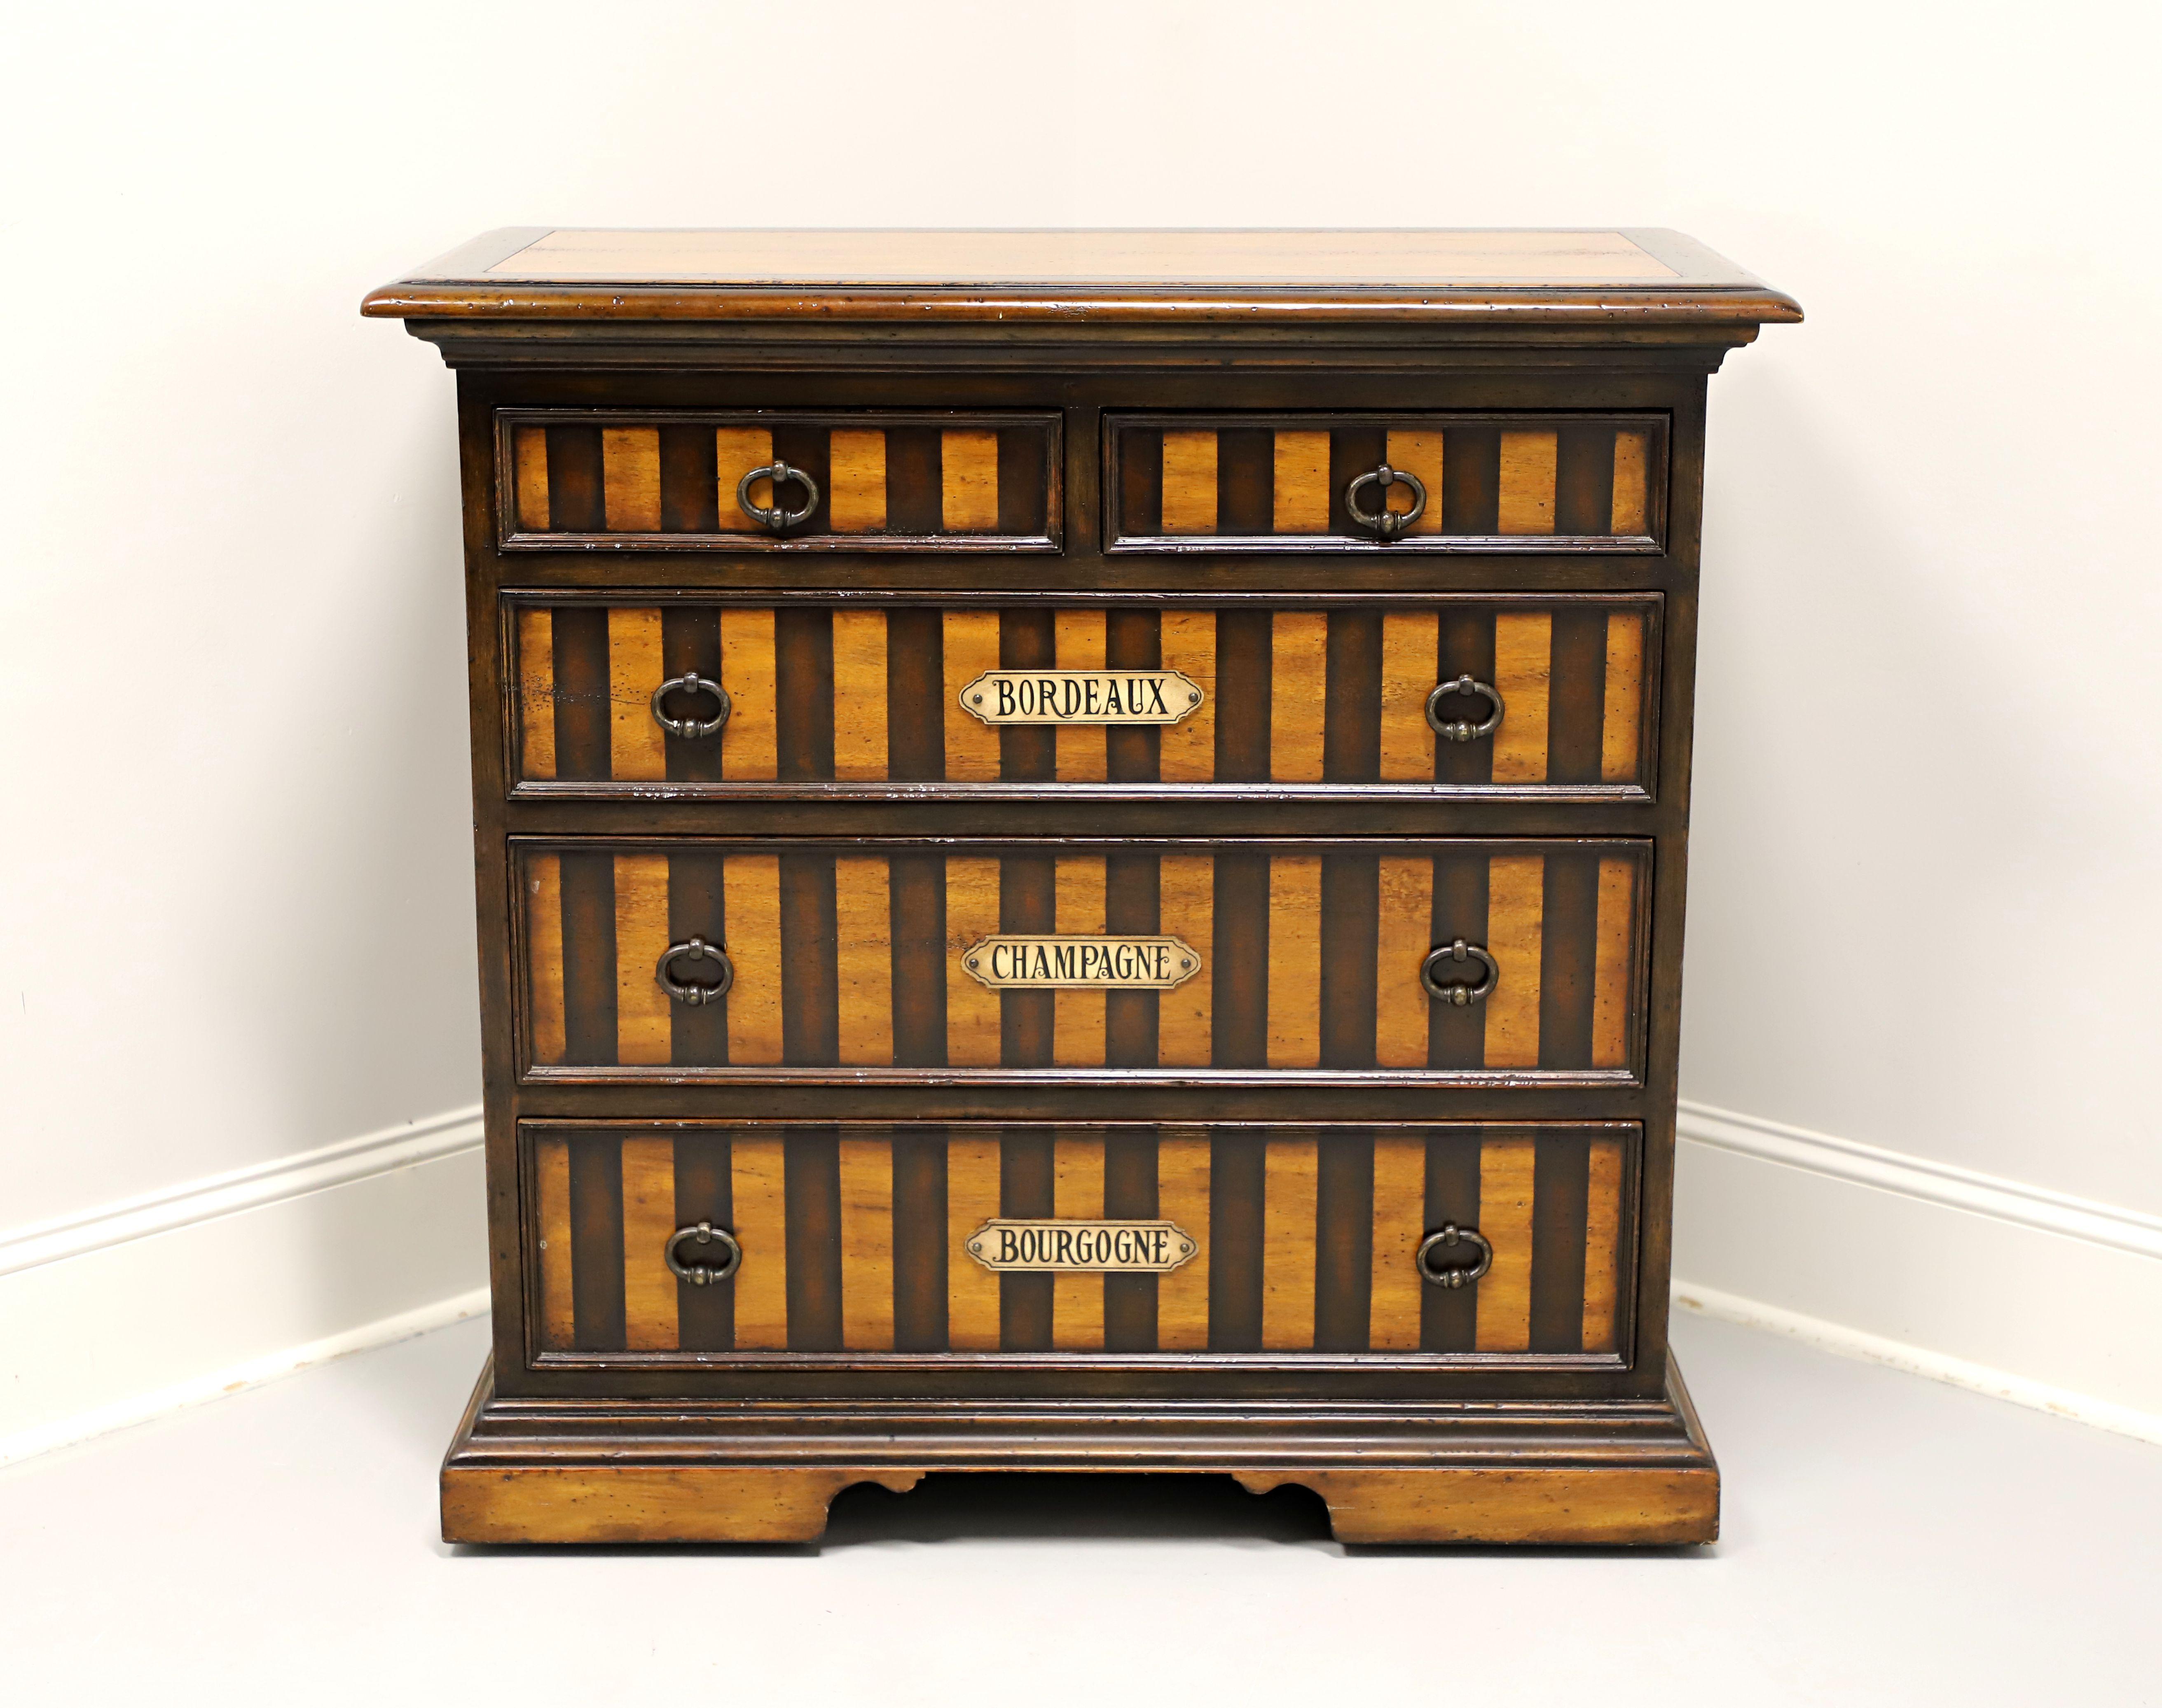 A Regency style occasional chest by Theodore Alexander. Walnut with a distressed finish, lighter and darker finish inlays, banded top with bullnose edge, brass ring hardware, and a bracket appearing solid base. Features two smaller over three larger